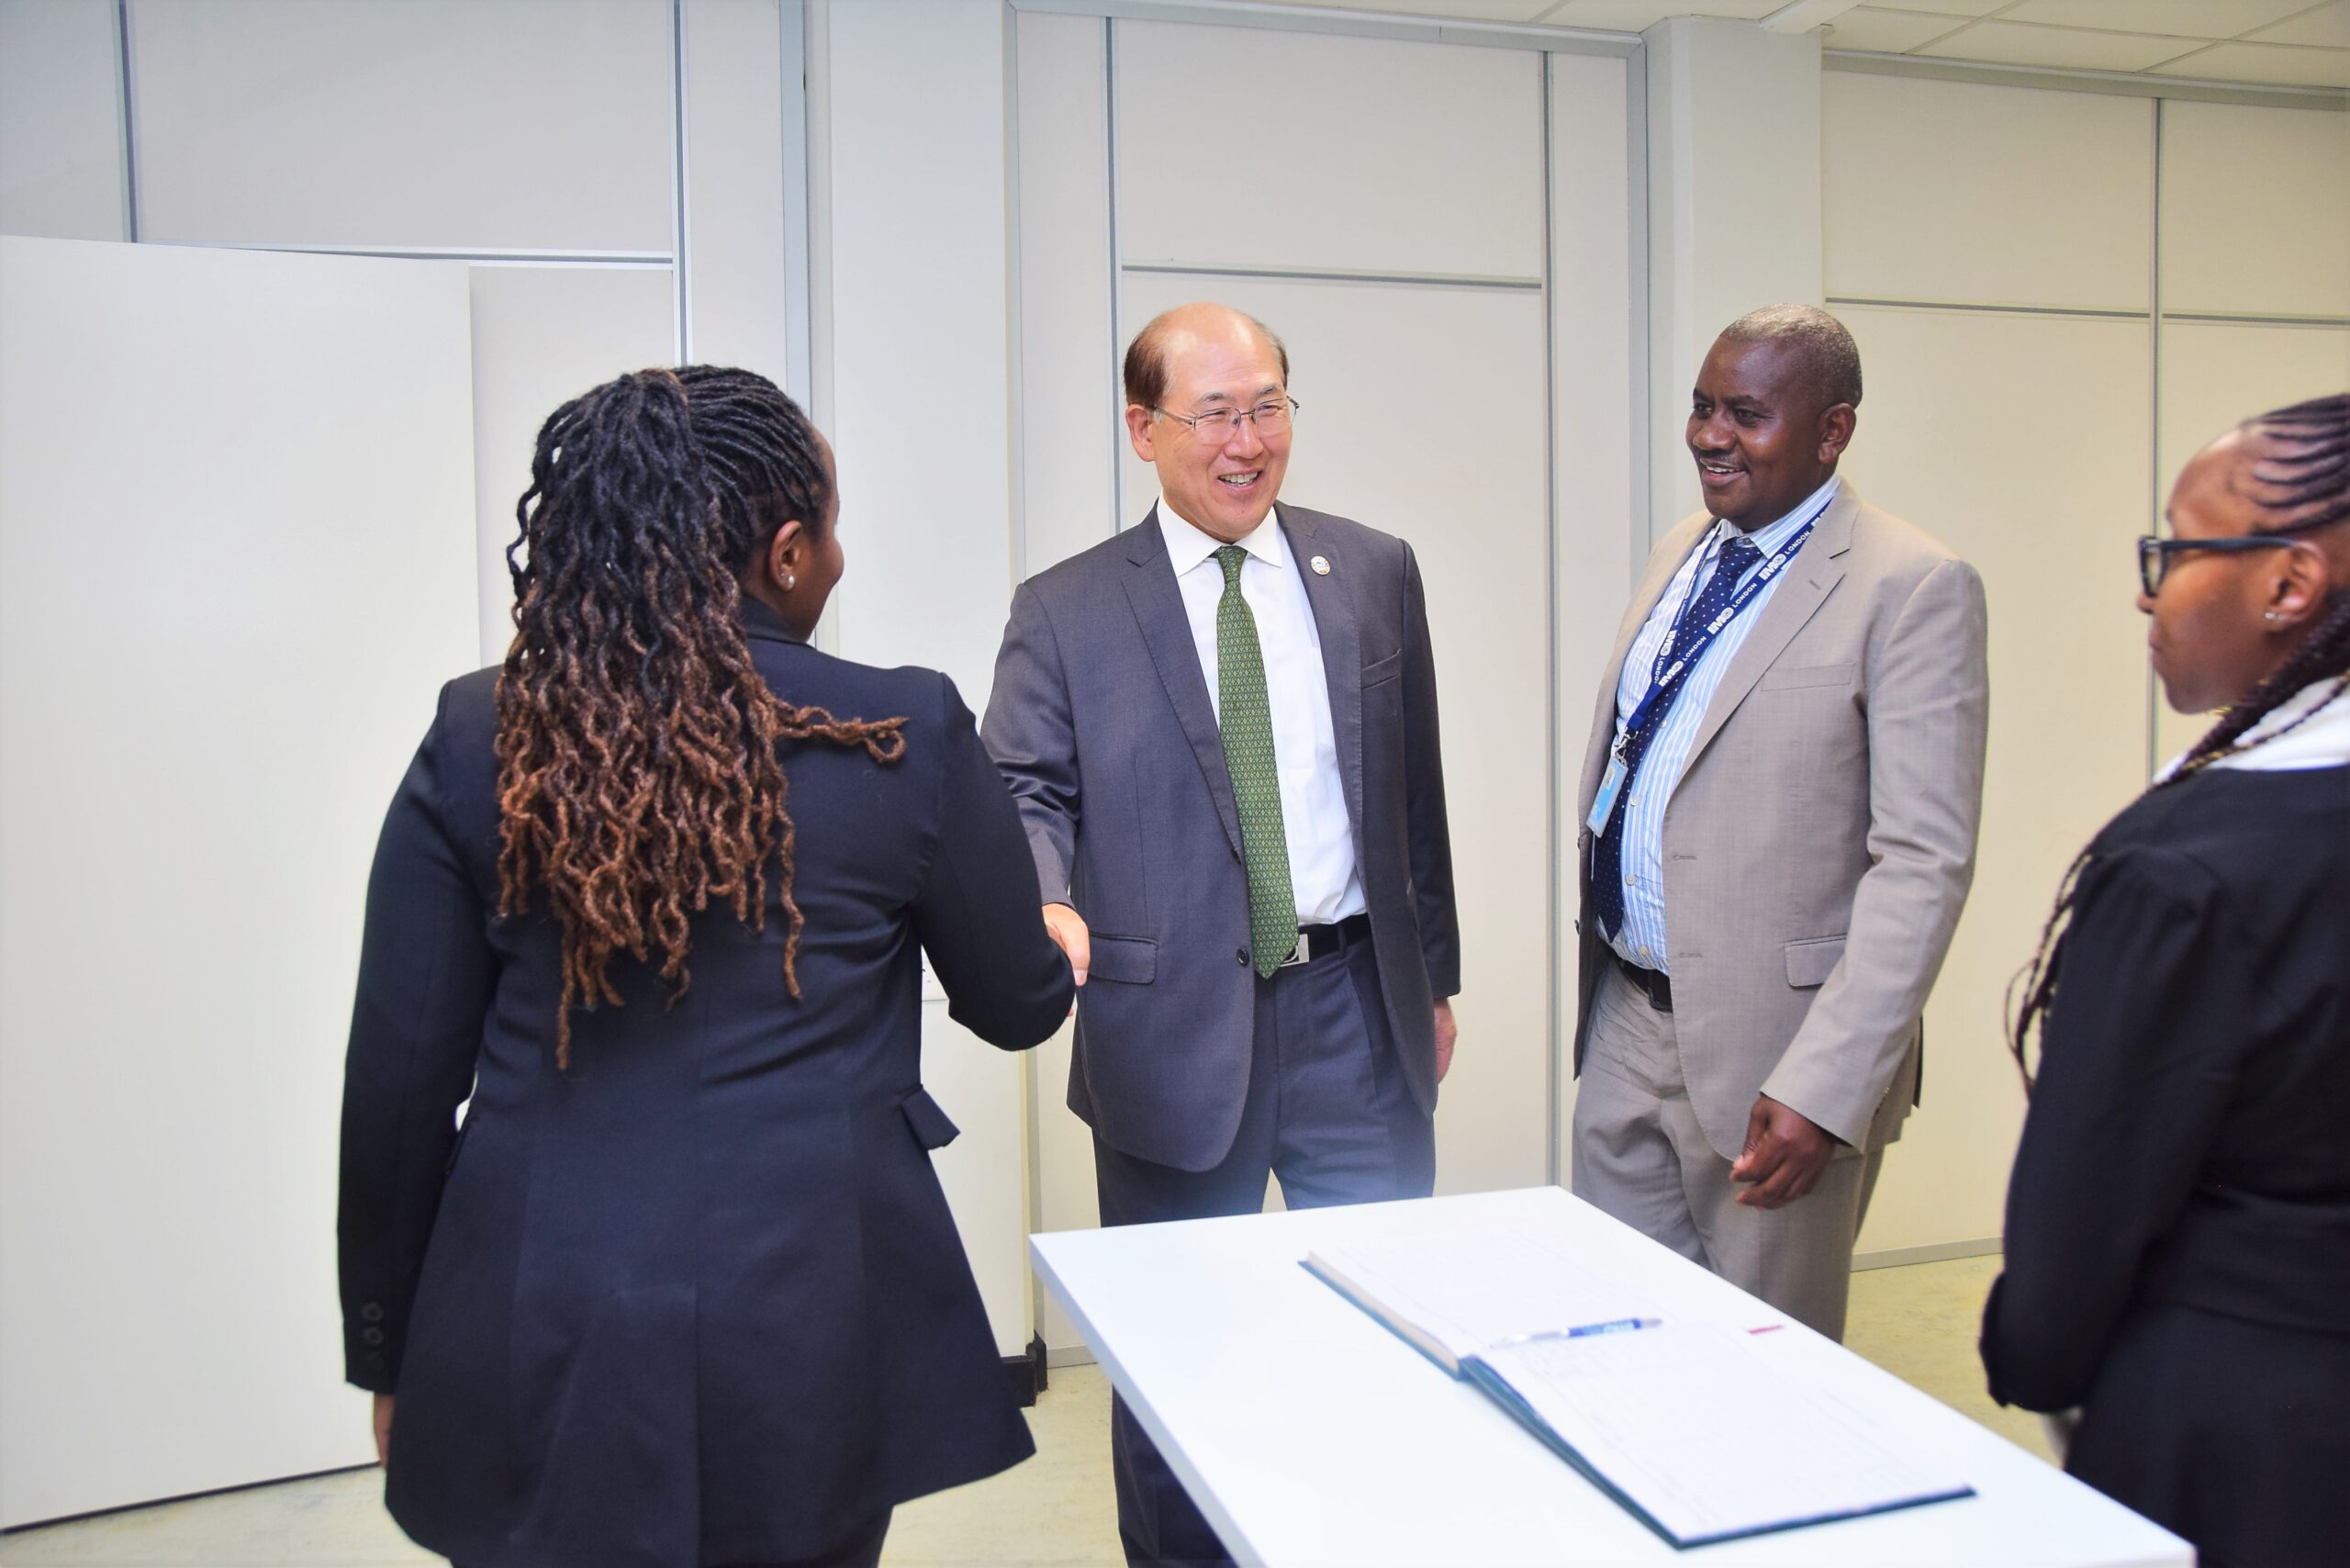 IMO SG visits and launches the Nairobi Field Office